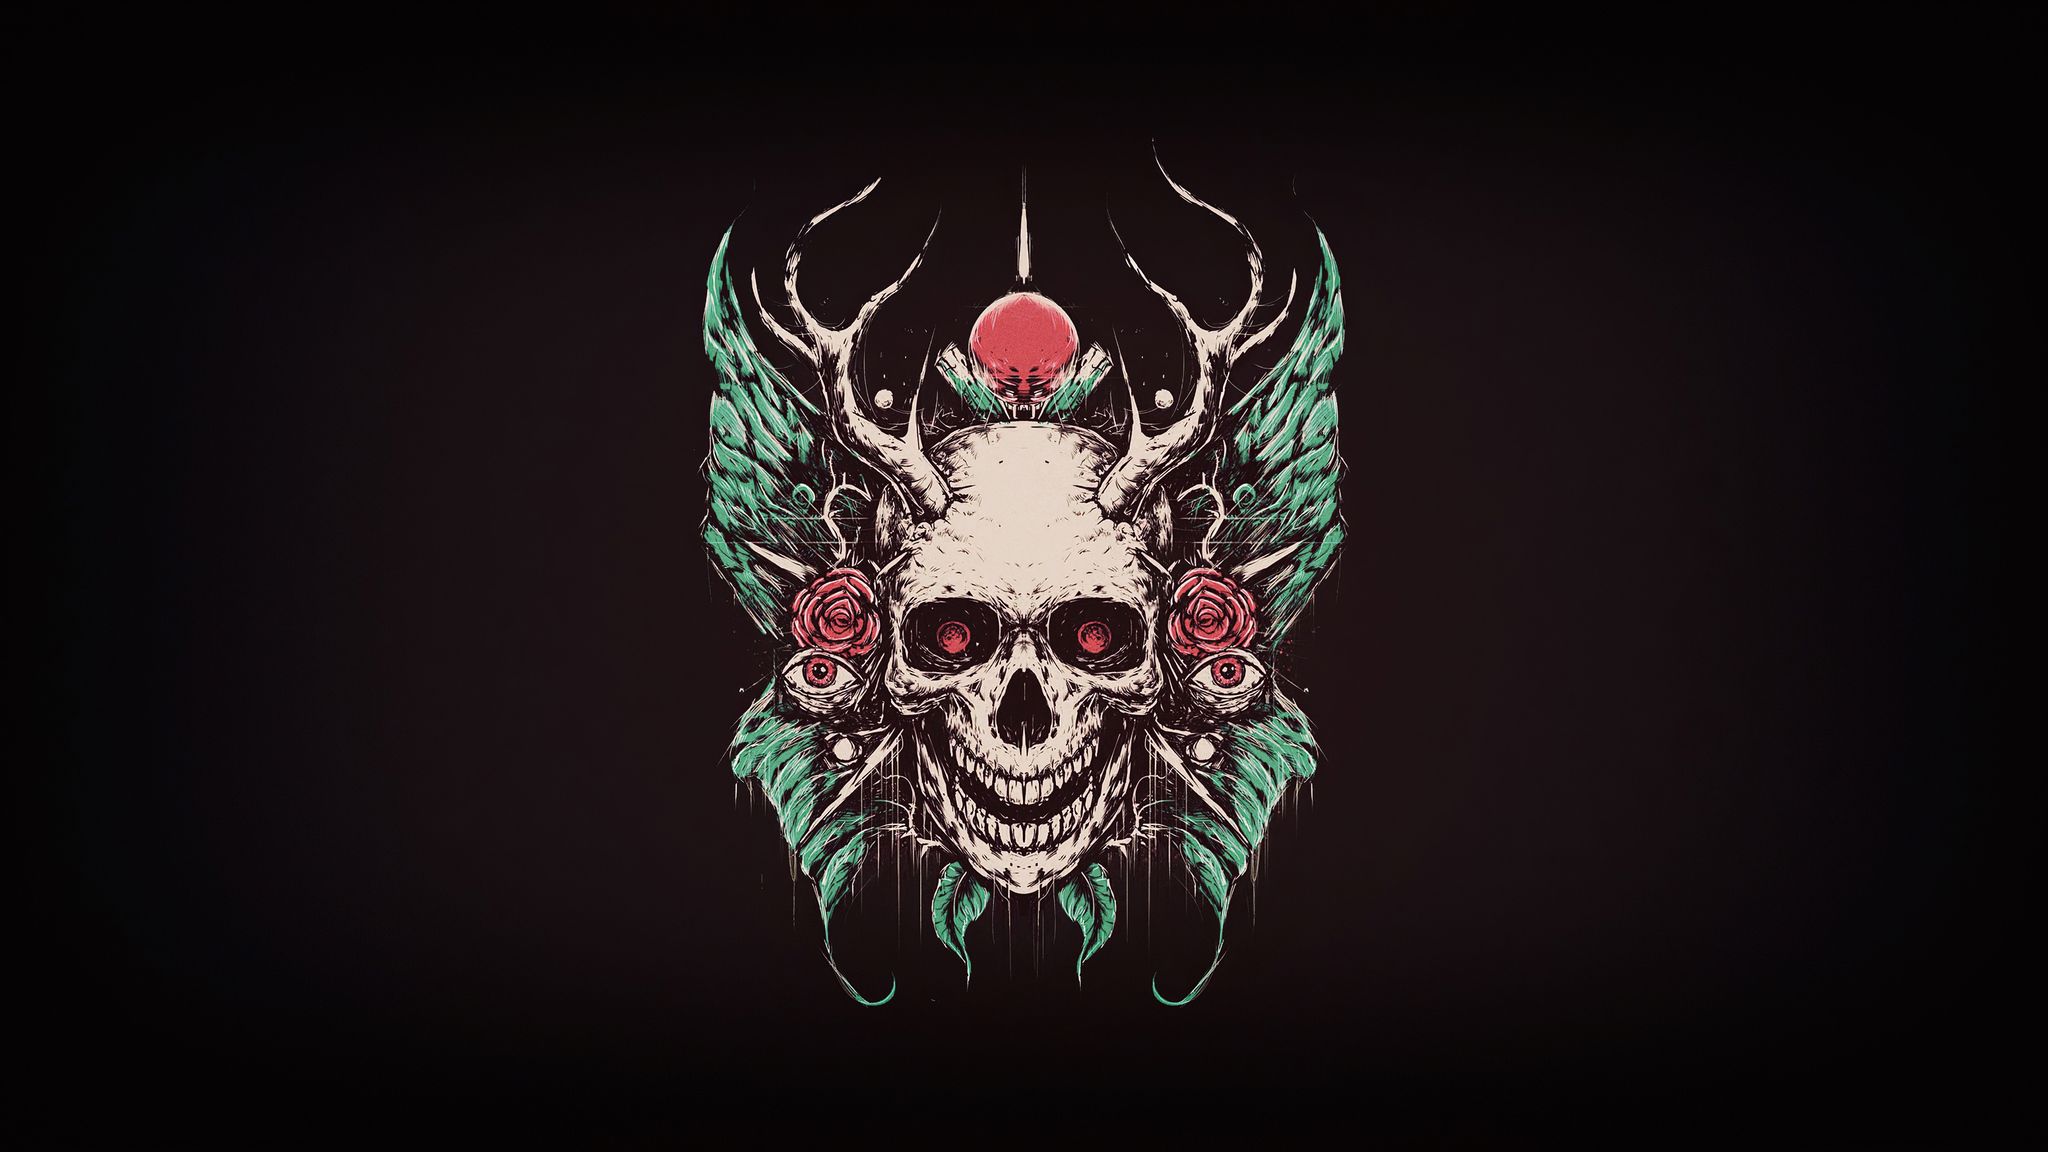 A skull with wings and roses on it - Crown